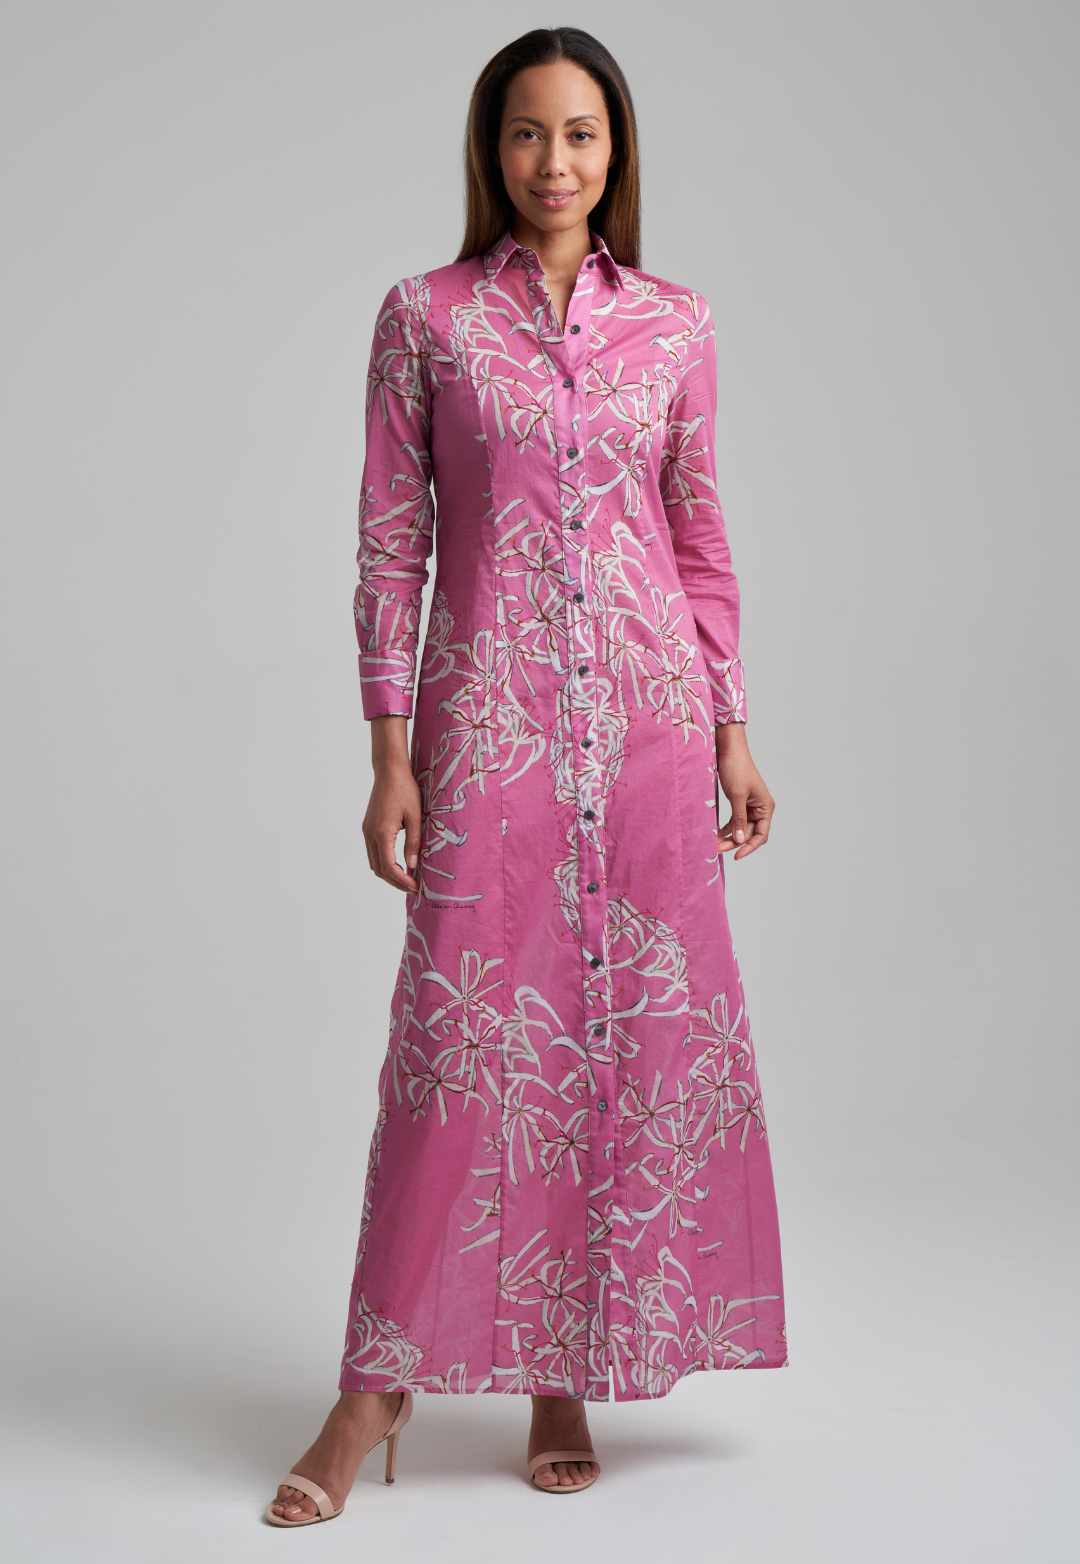 Woman wearing long cotton shirt dress in pink spider lily print by Ala von Auersperg for spring summer 2021